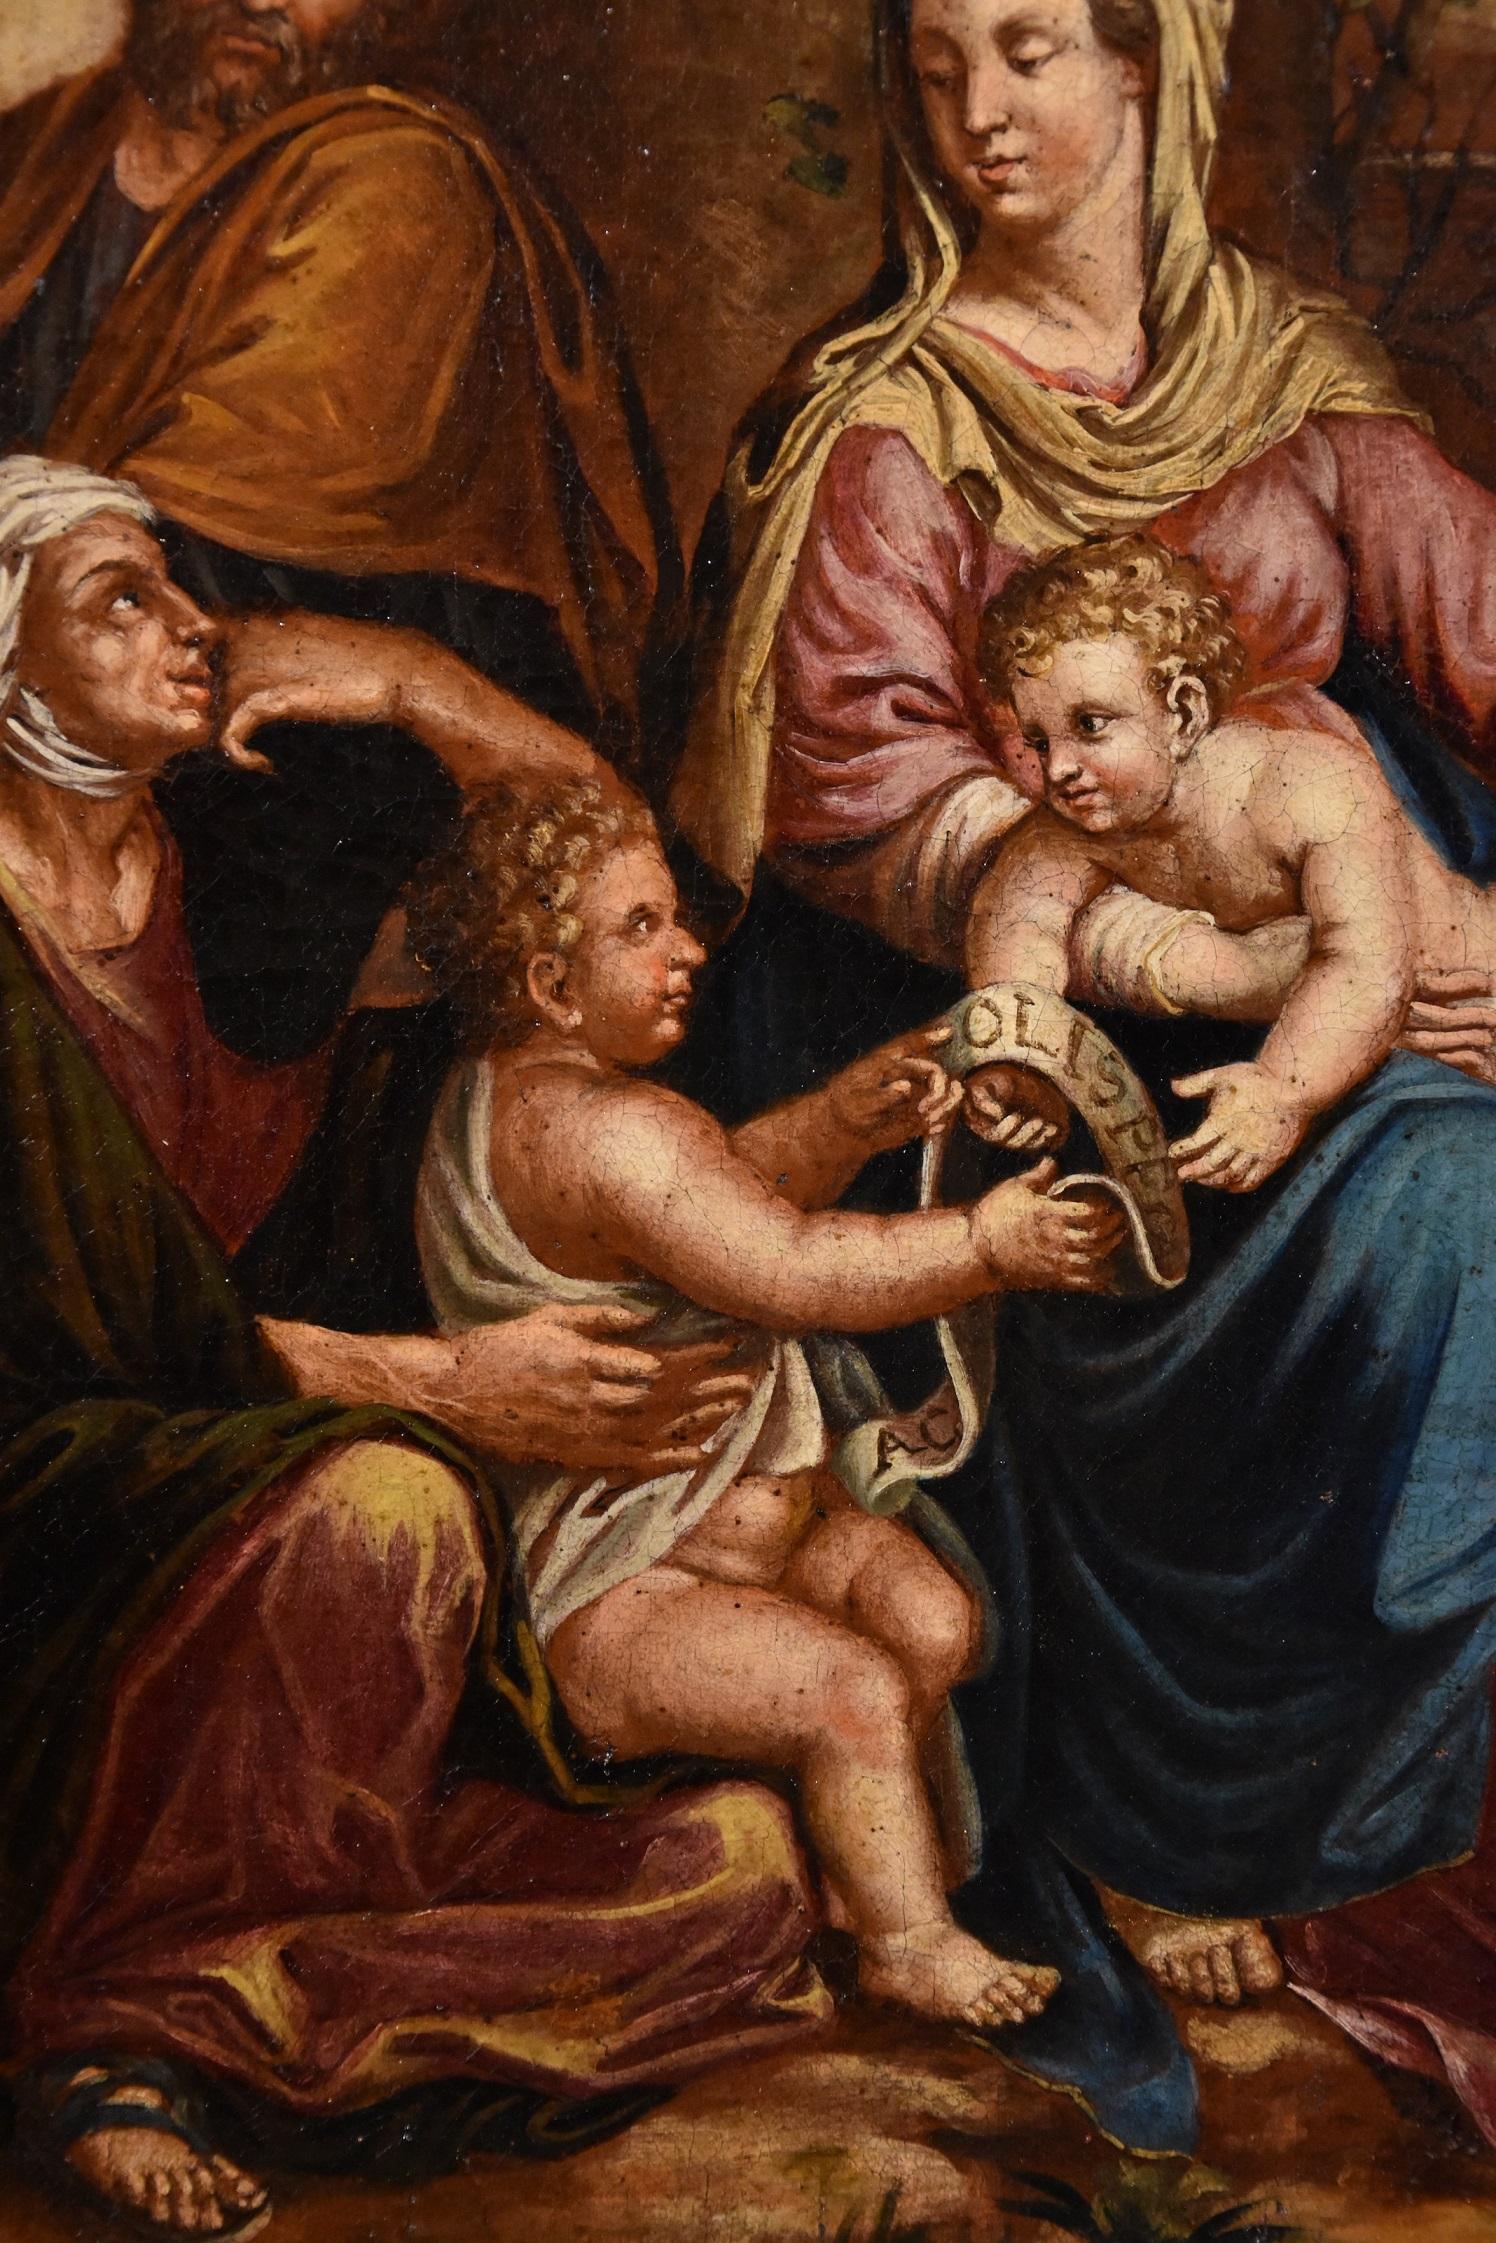 Holy Family Poussin Paint Oil on canvas Old master 17th Century Religious Art 4